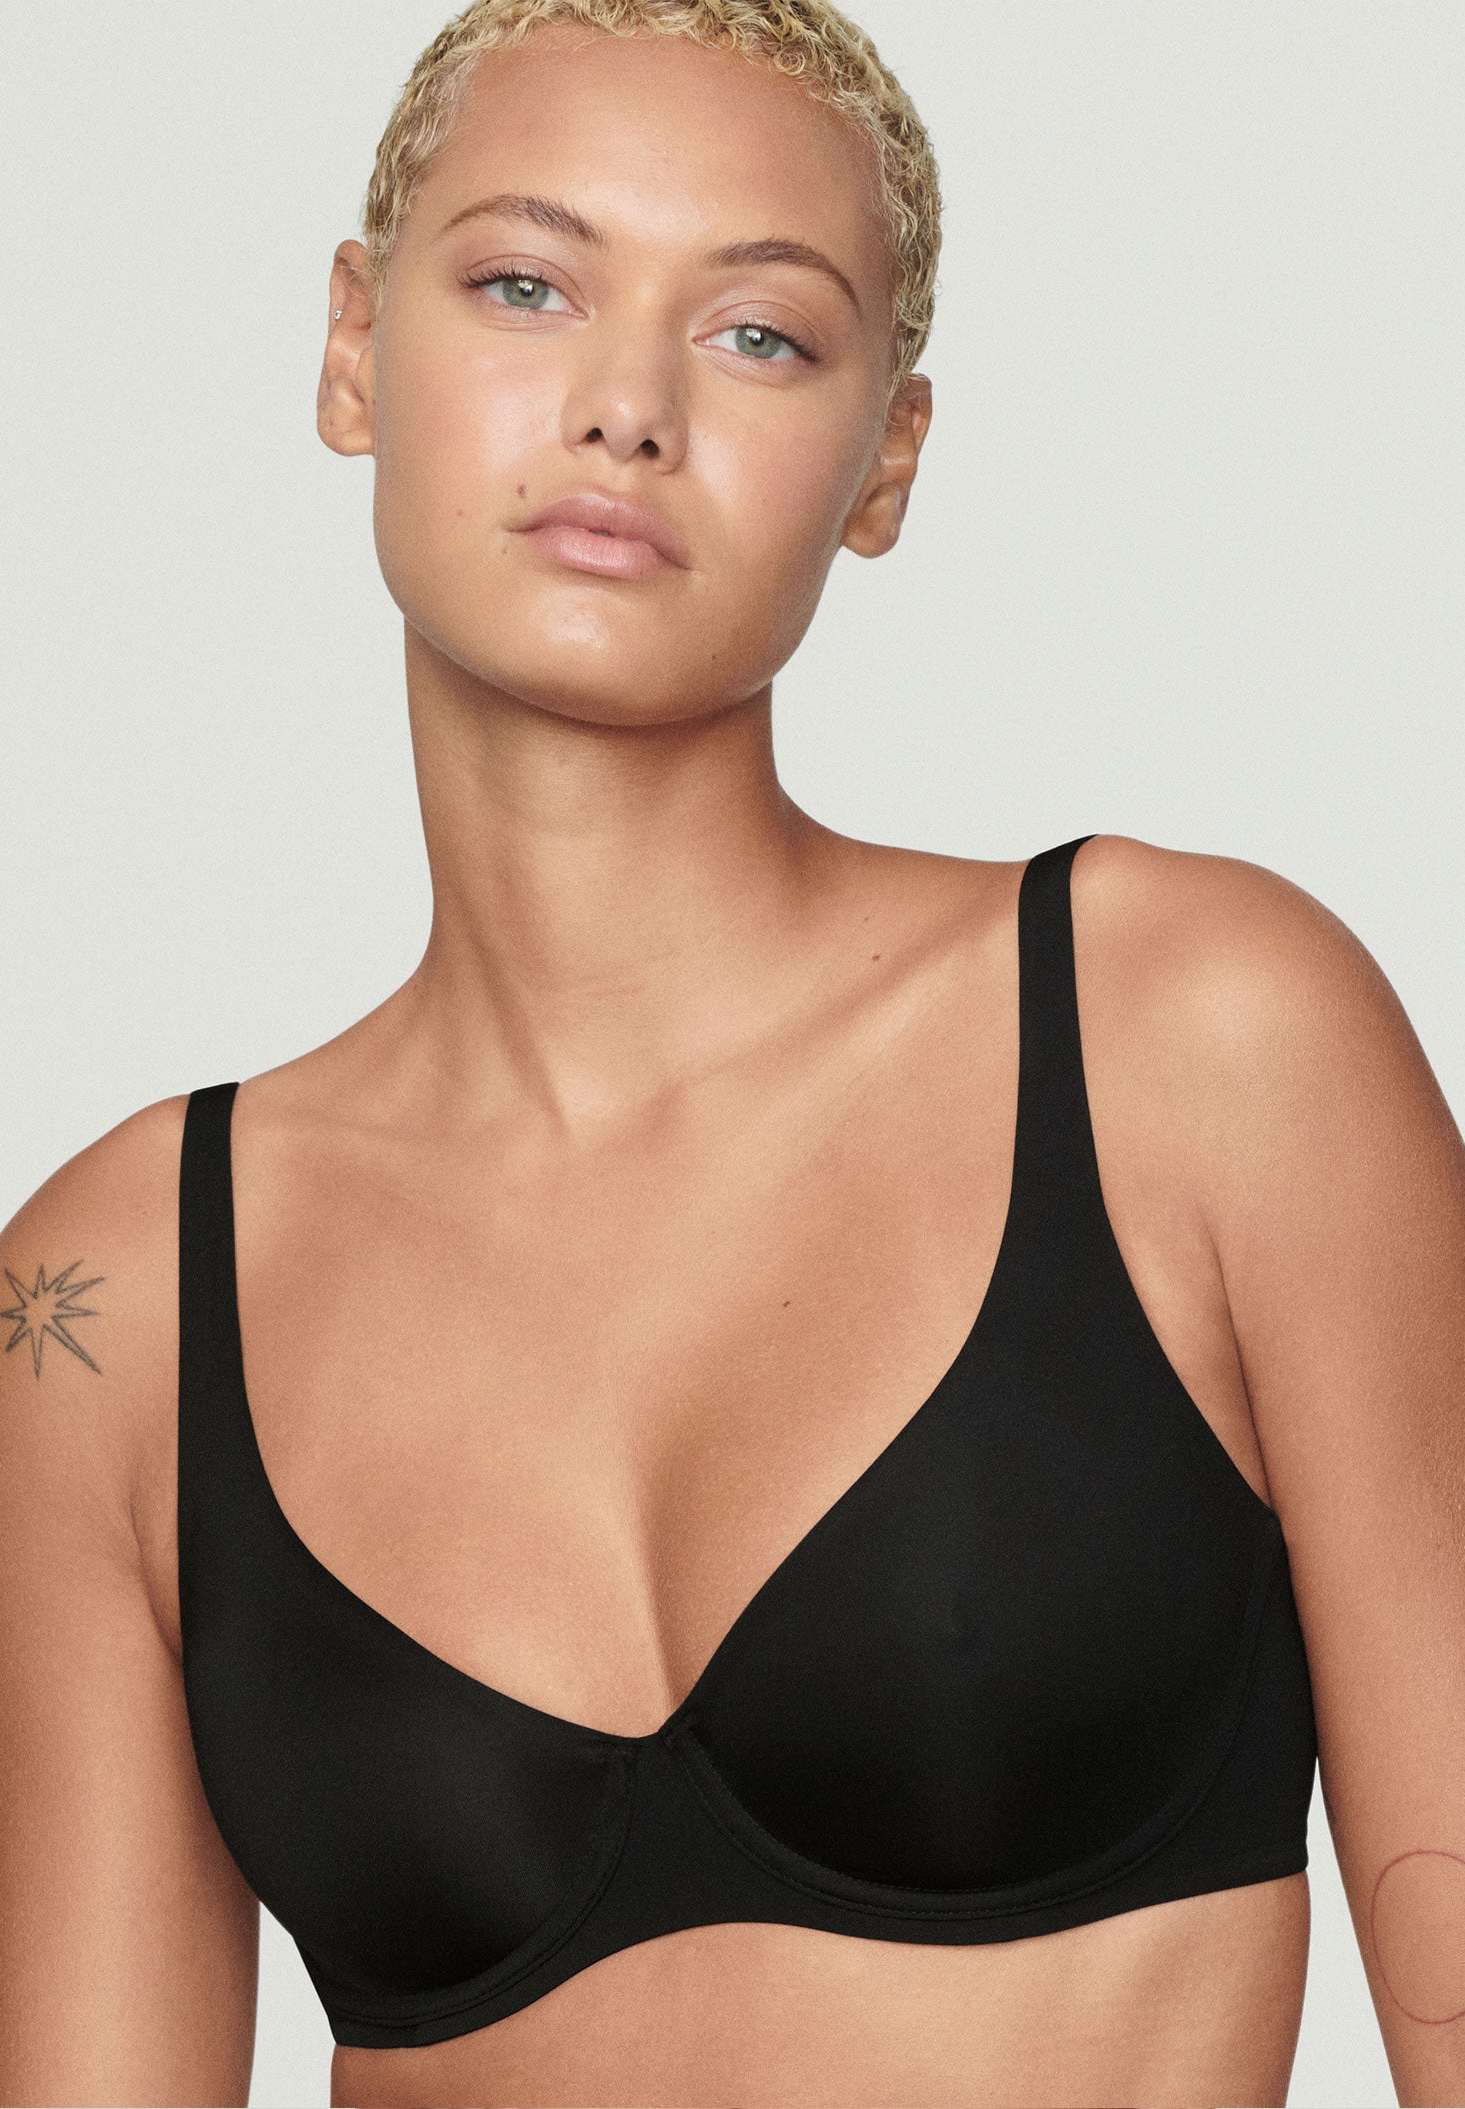 The Scoop Bra - Off-duty comfort. At-work support., CUUP